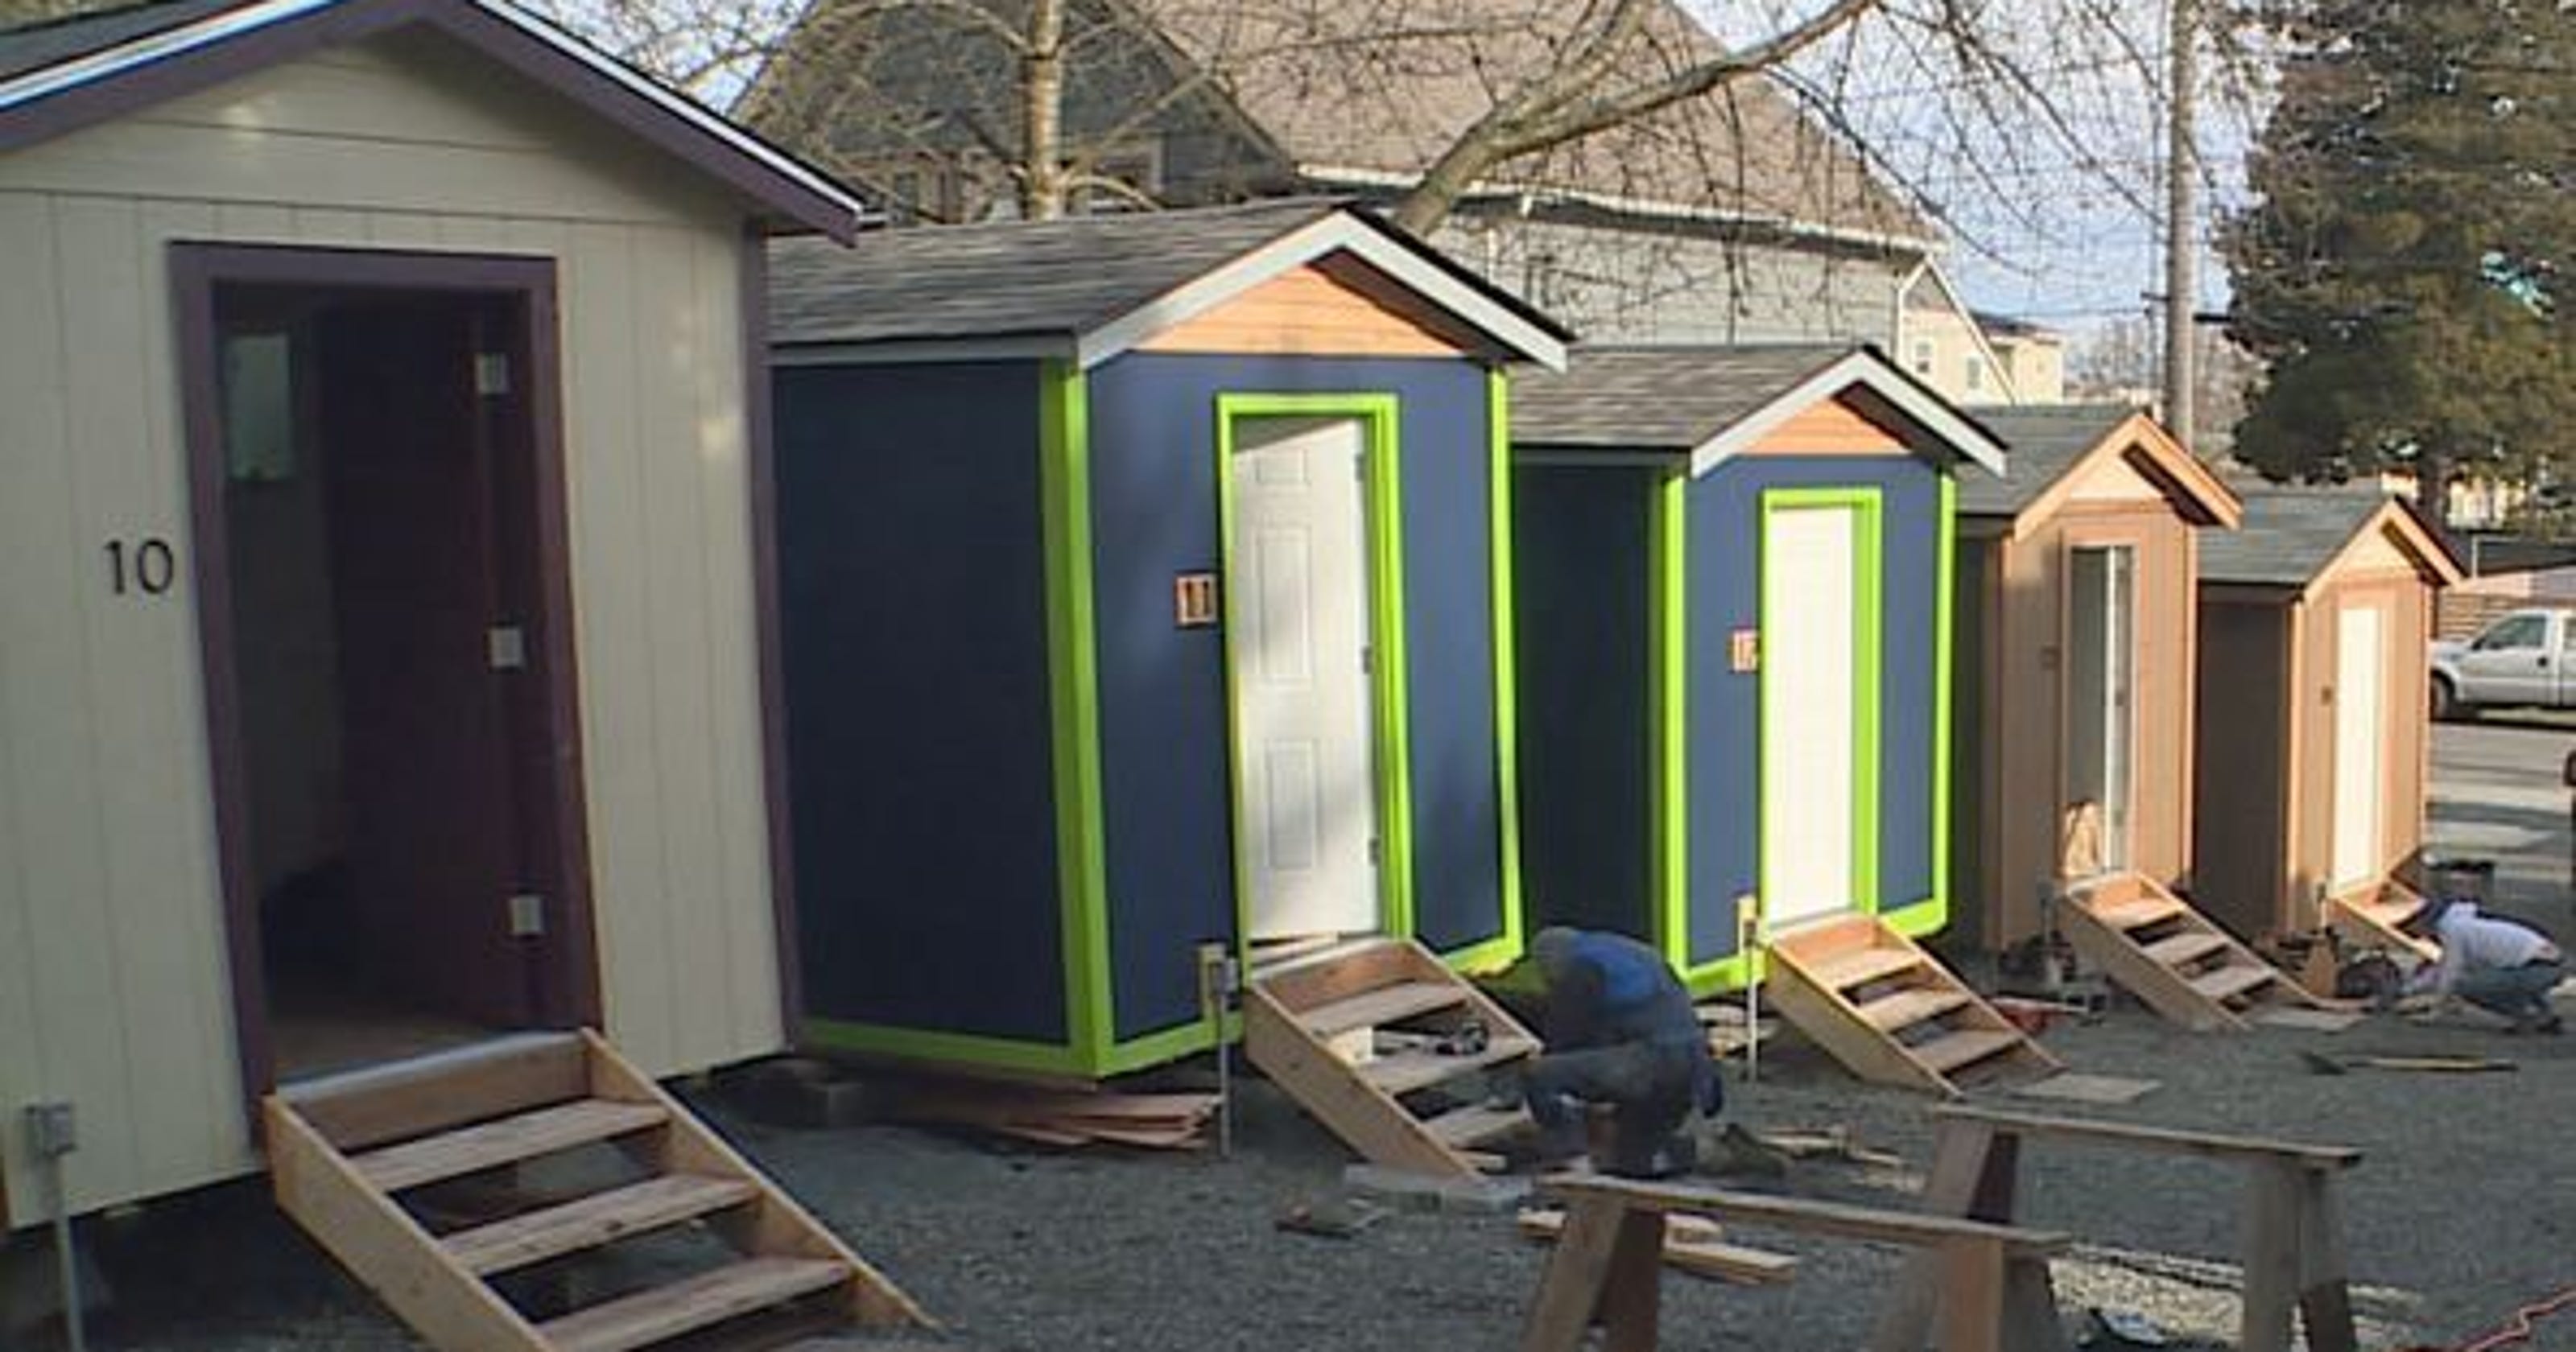 636433943788797263-tiny-houses.jpg?width=3200&height=1680&fit=crop